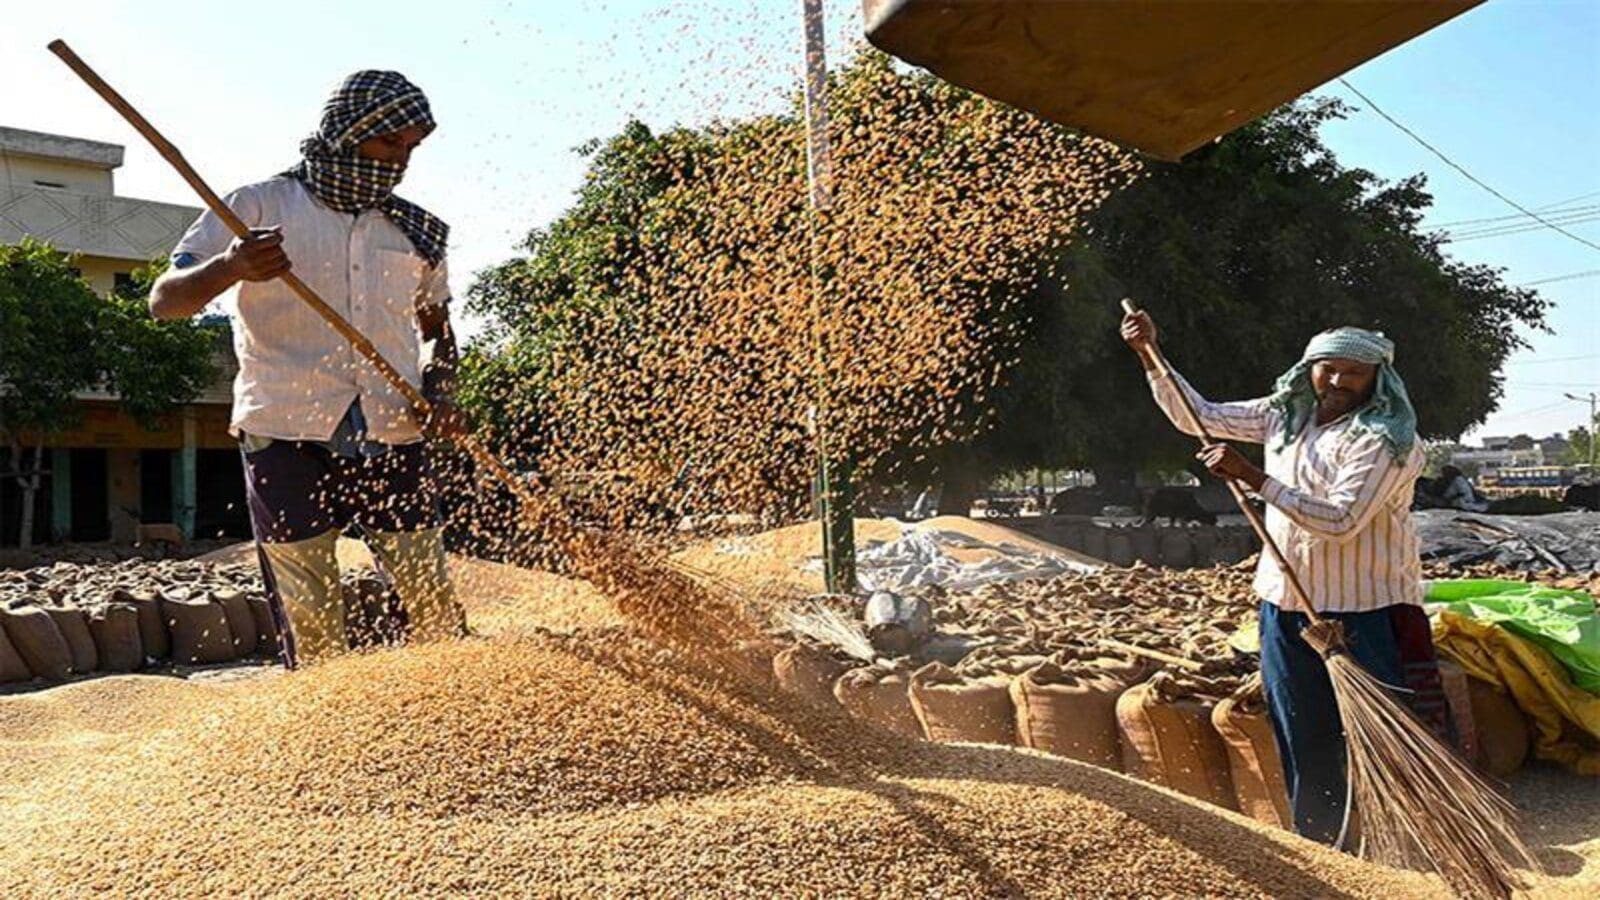 Egypt secures US$ 66M from EU, AFD as grain storage expansion aid